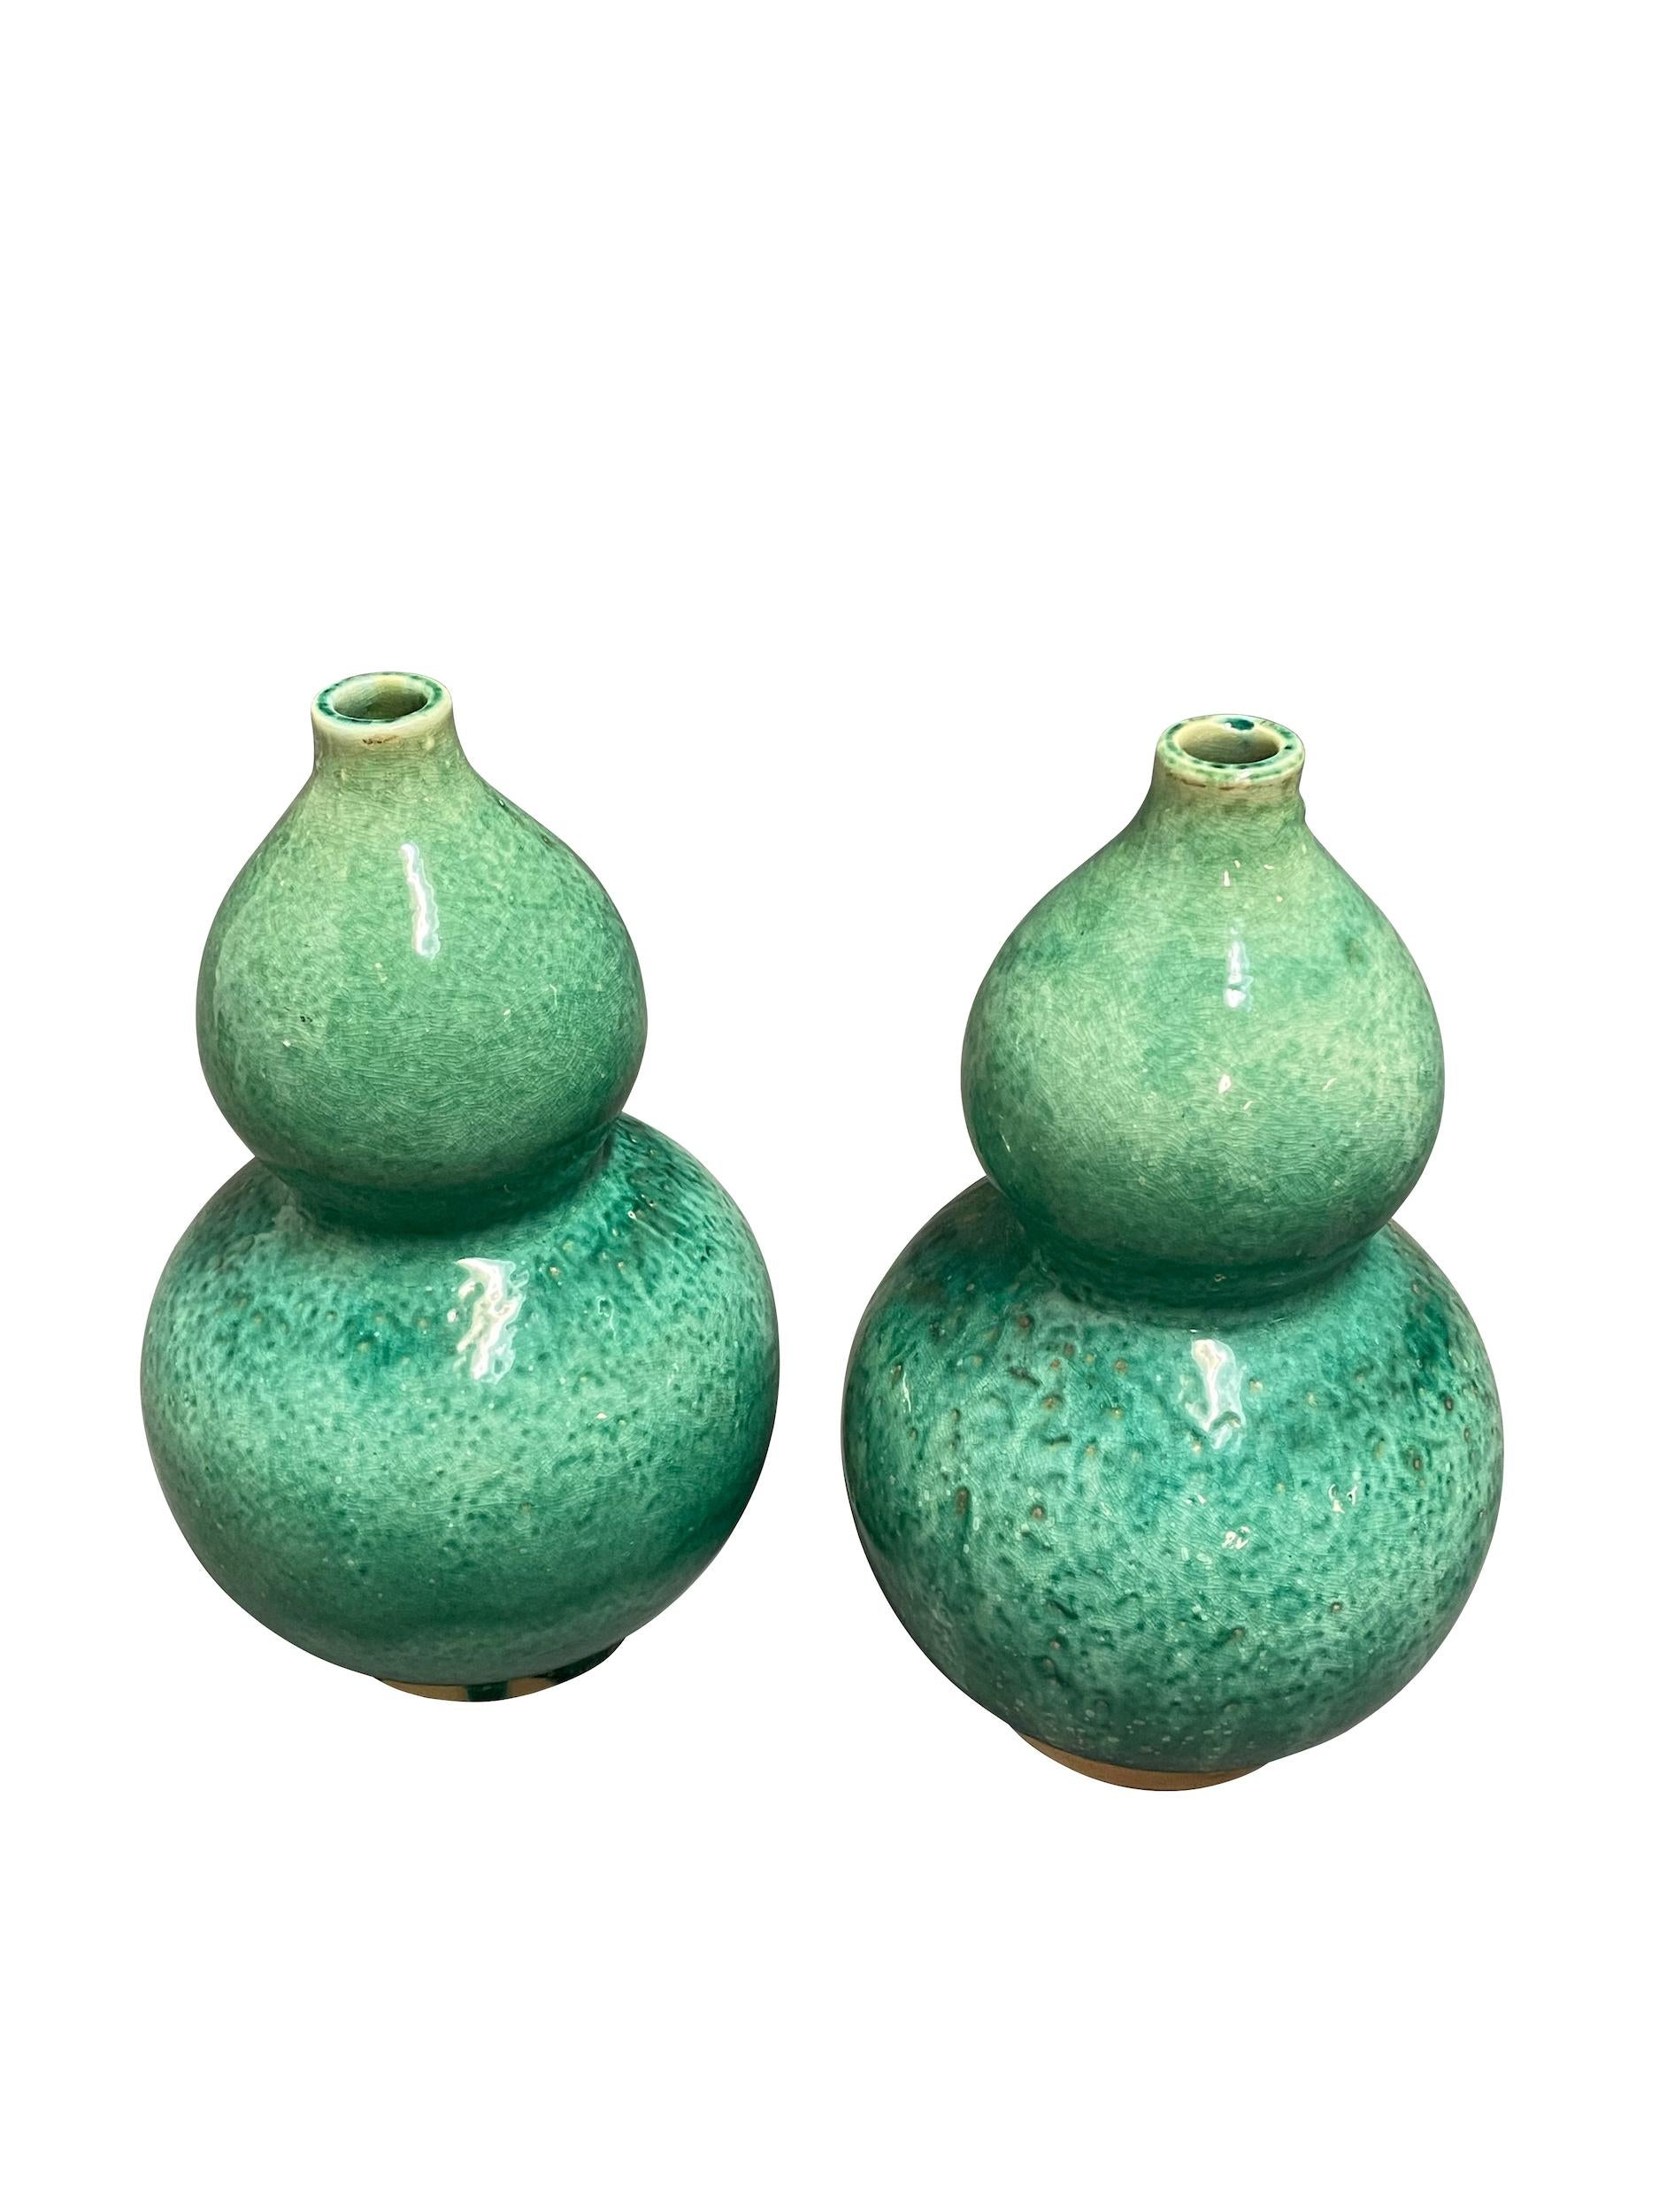 Contemporary Chinese gourd shaped vase with a mottled emerald glaze.
Two available and sold individually.
